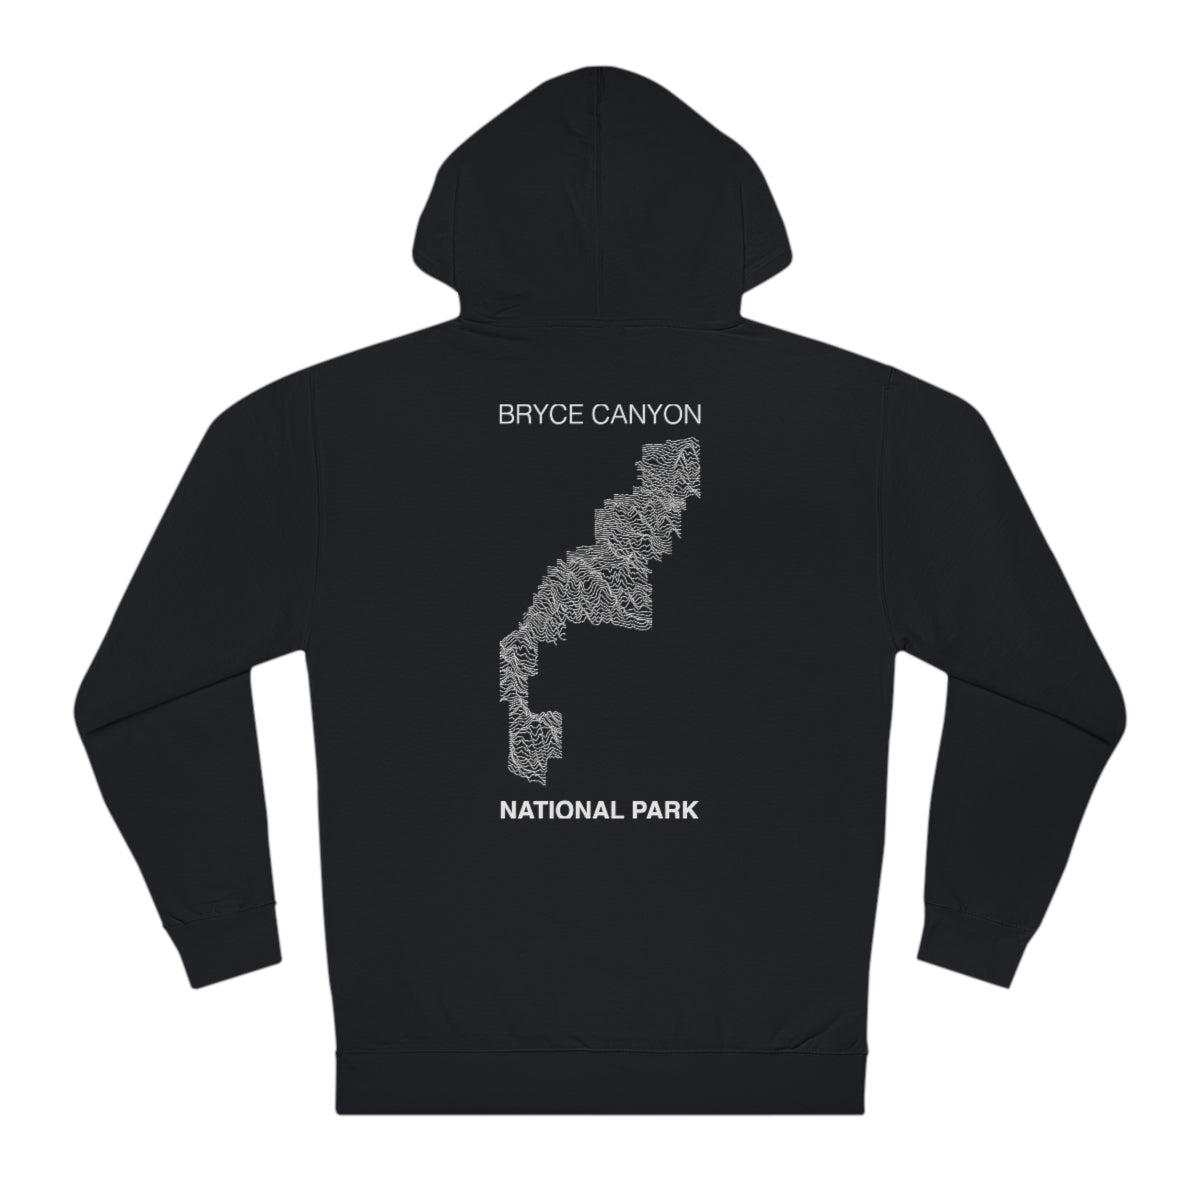 Bryce Canyon National Park Hoodie - Lines